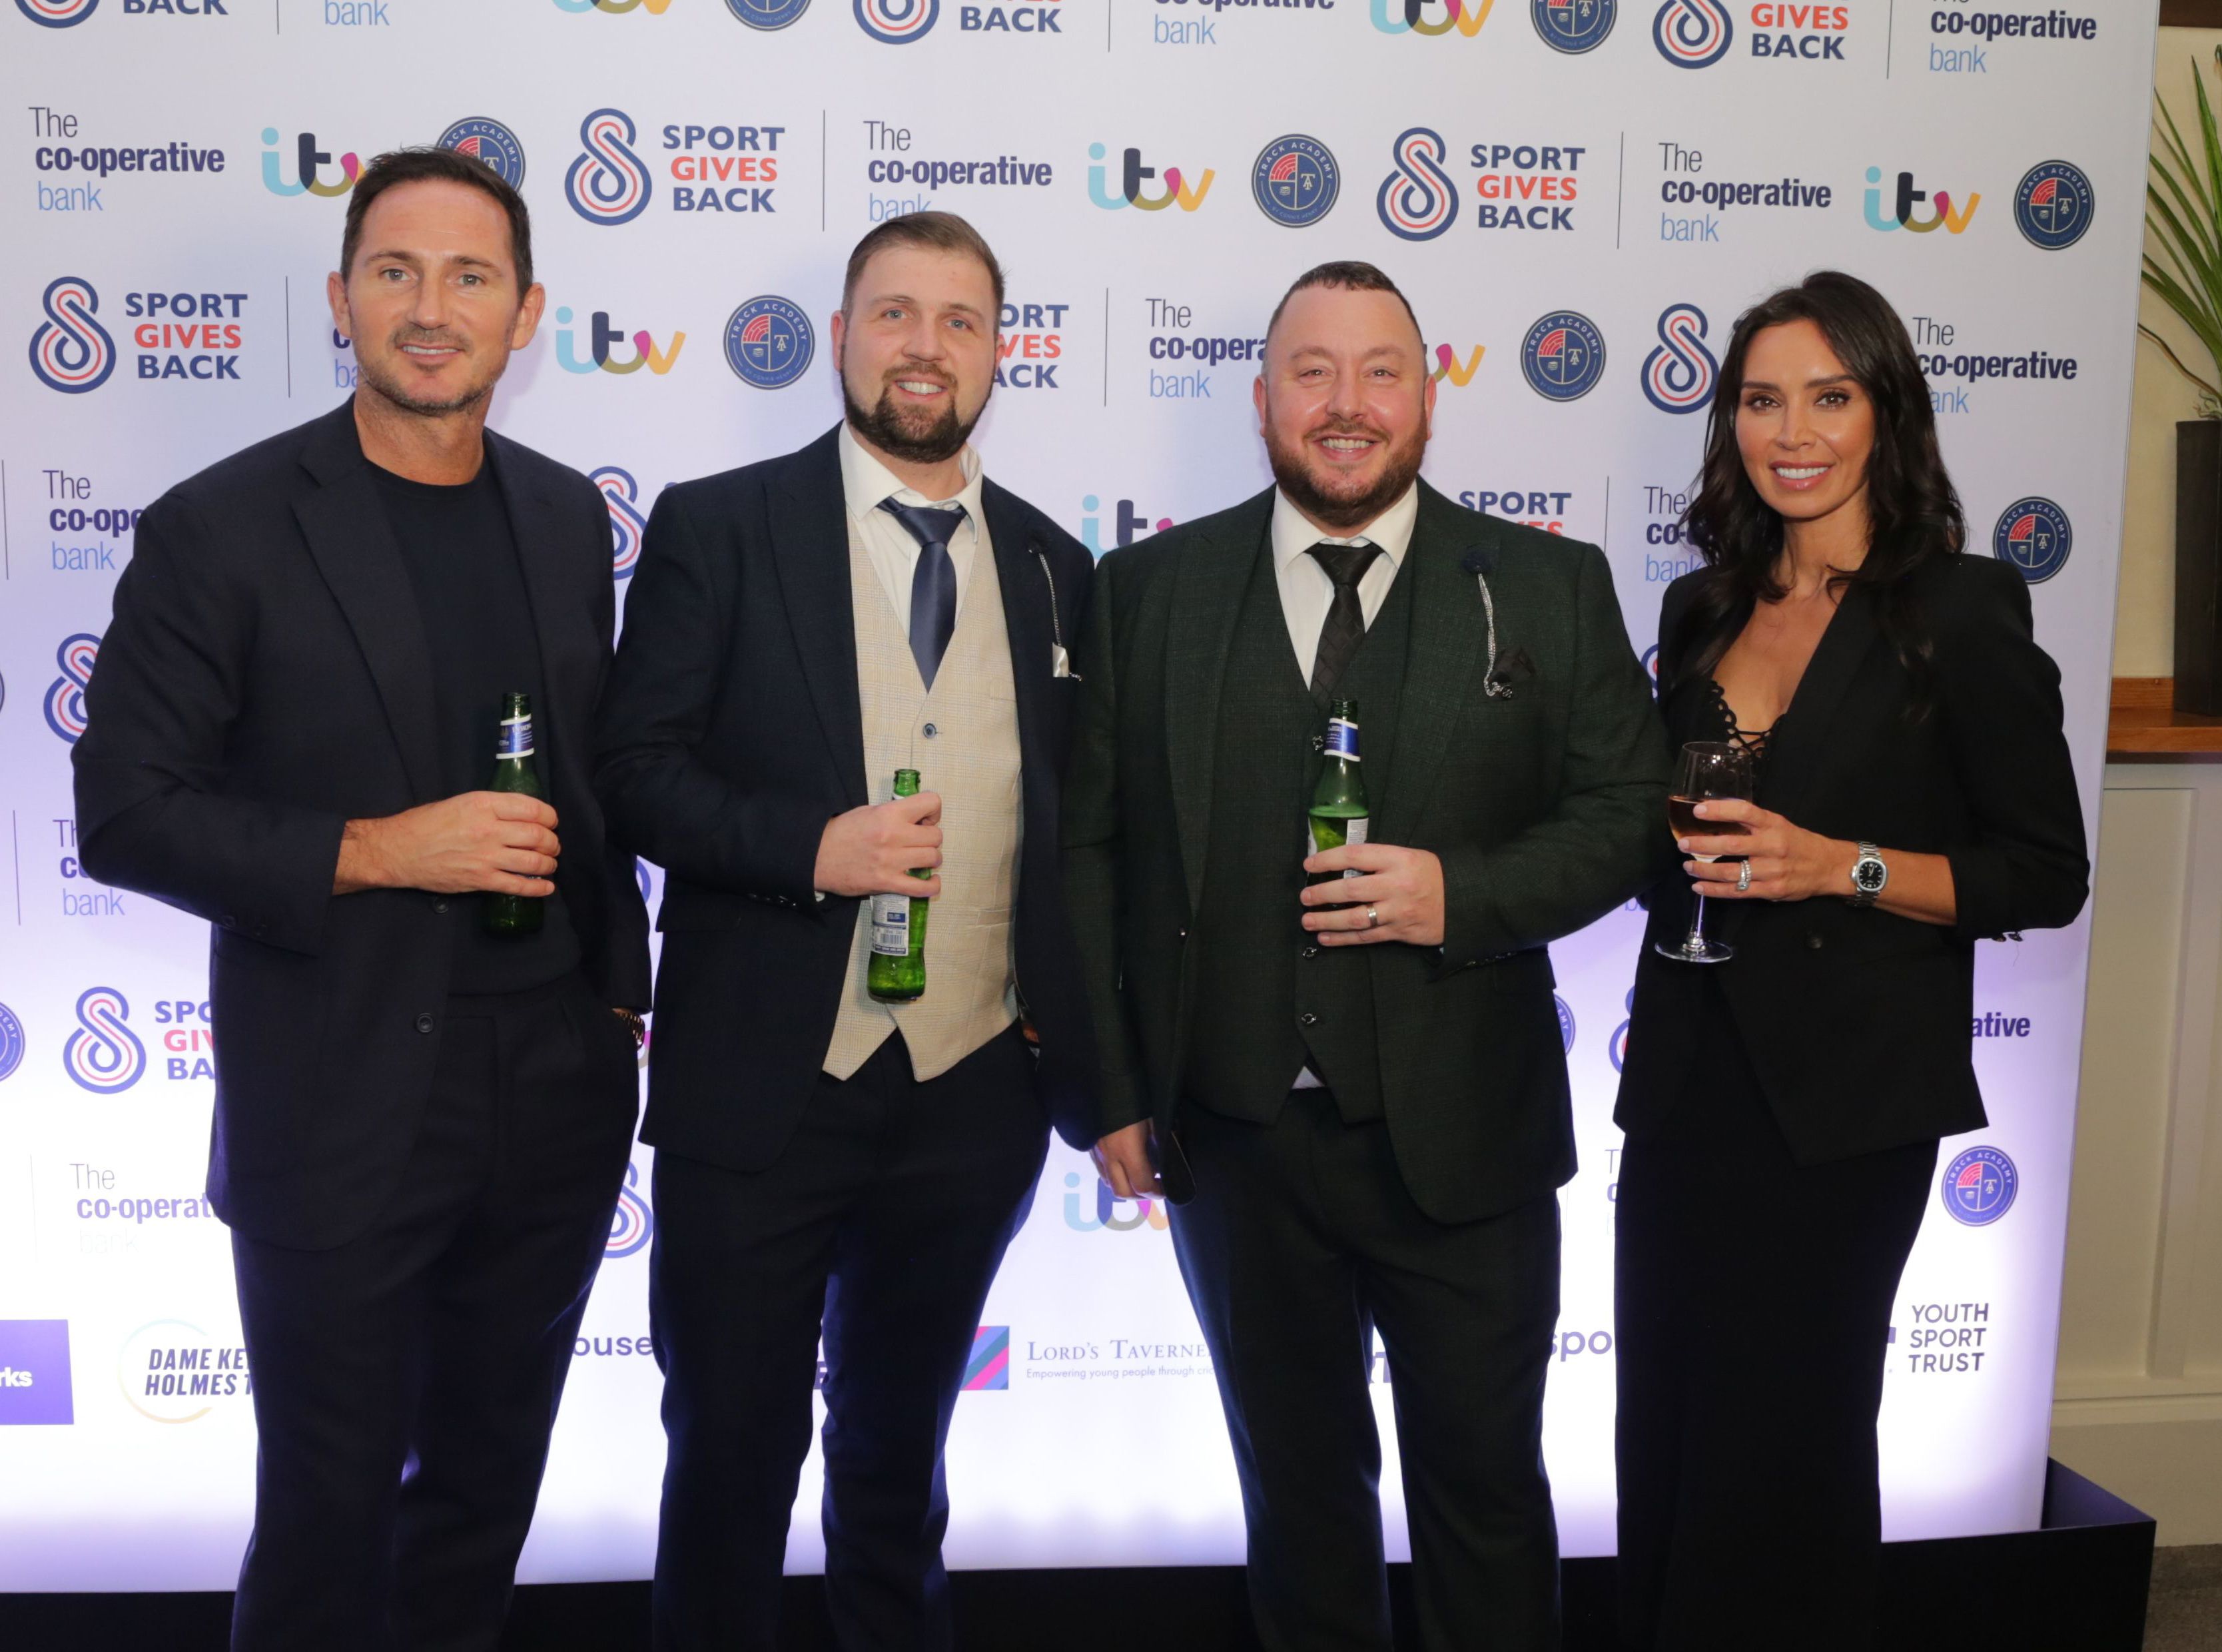 CHEERS: Footballer Frank Lampard, Joe Donnelly, CEO of TAMH, Mickey Meehan, Youth Coordinator TAMHI, and TV presenter Christine Lampard